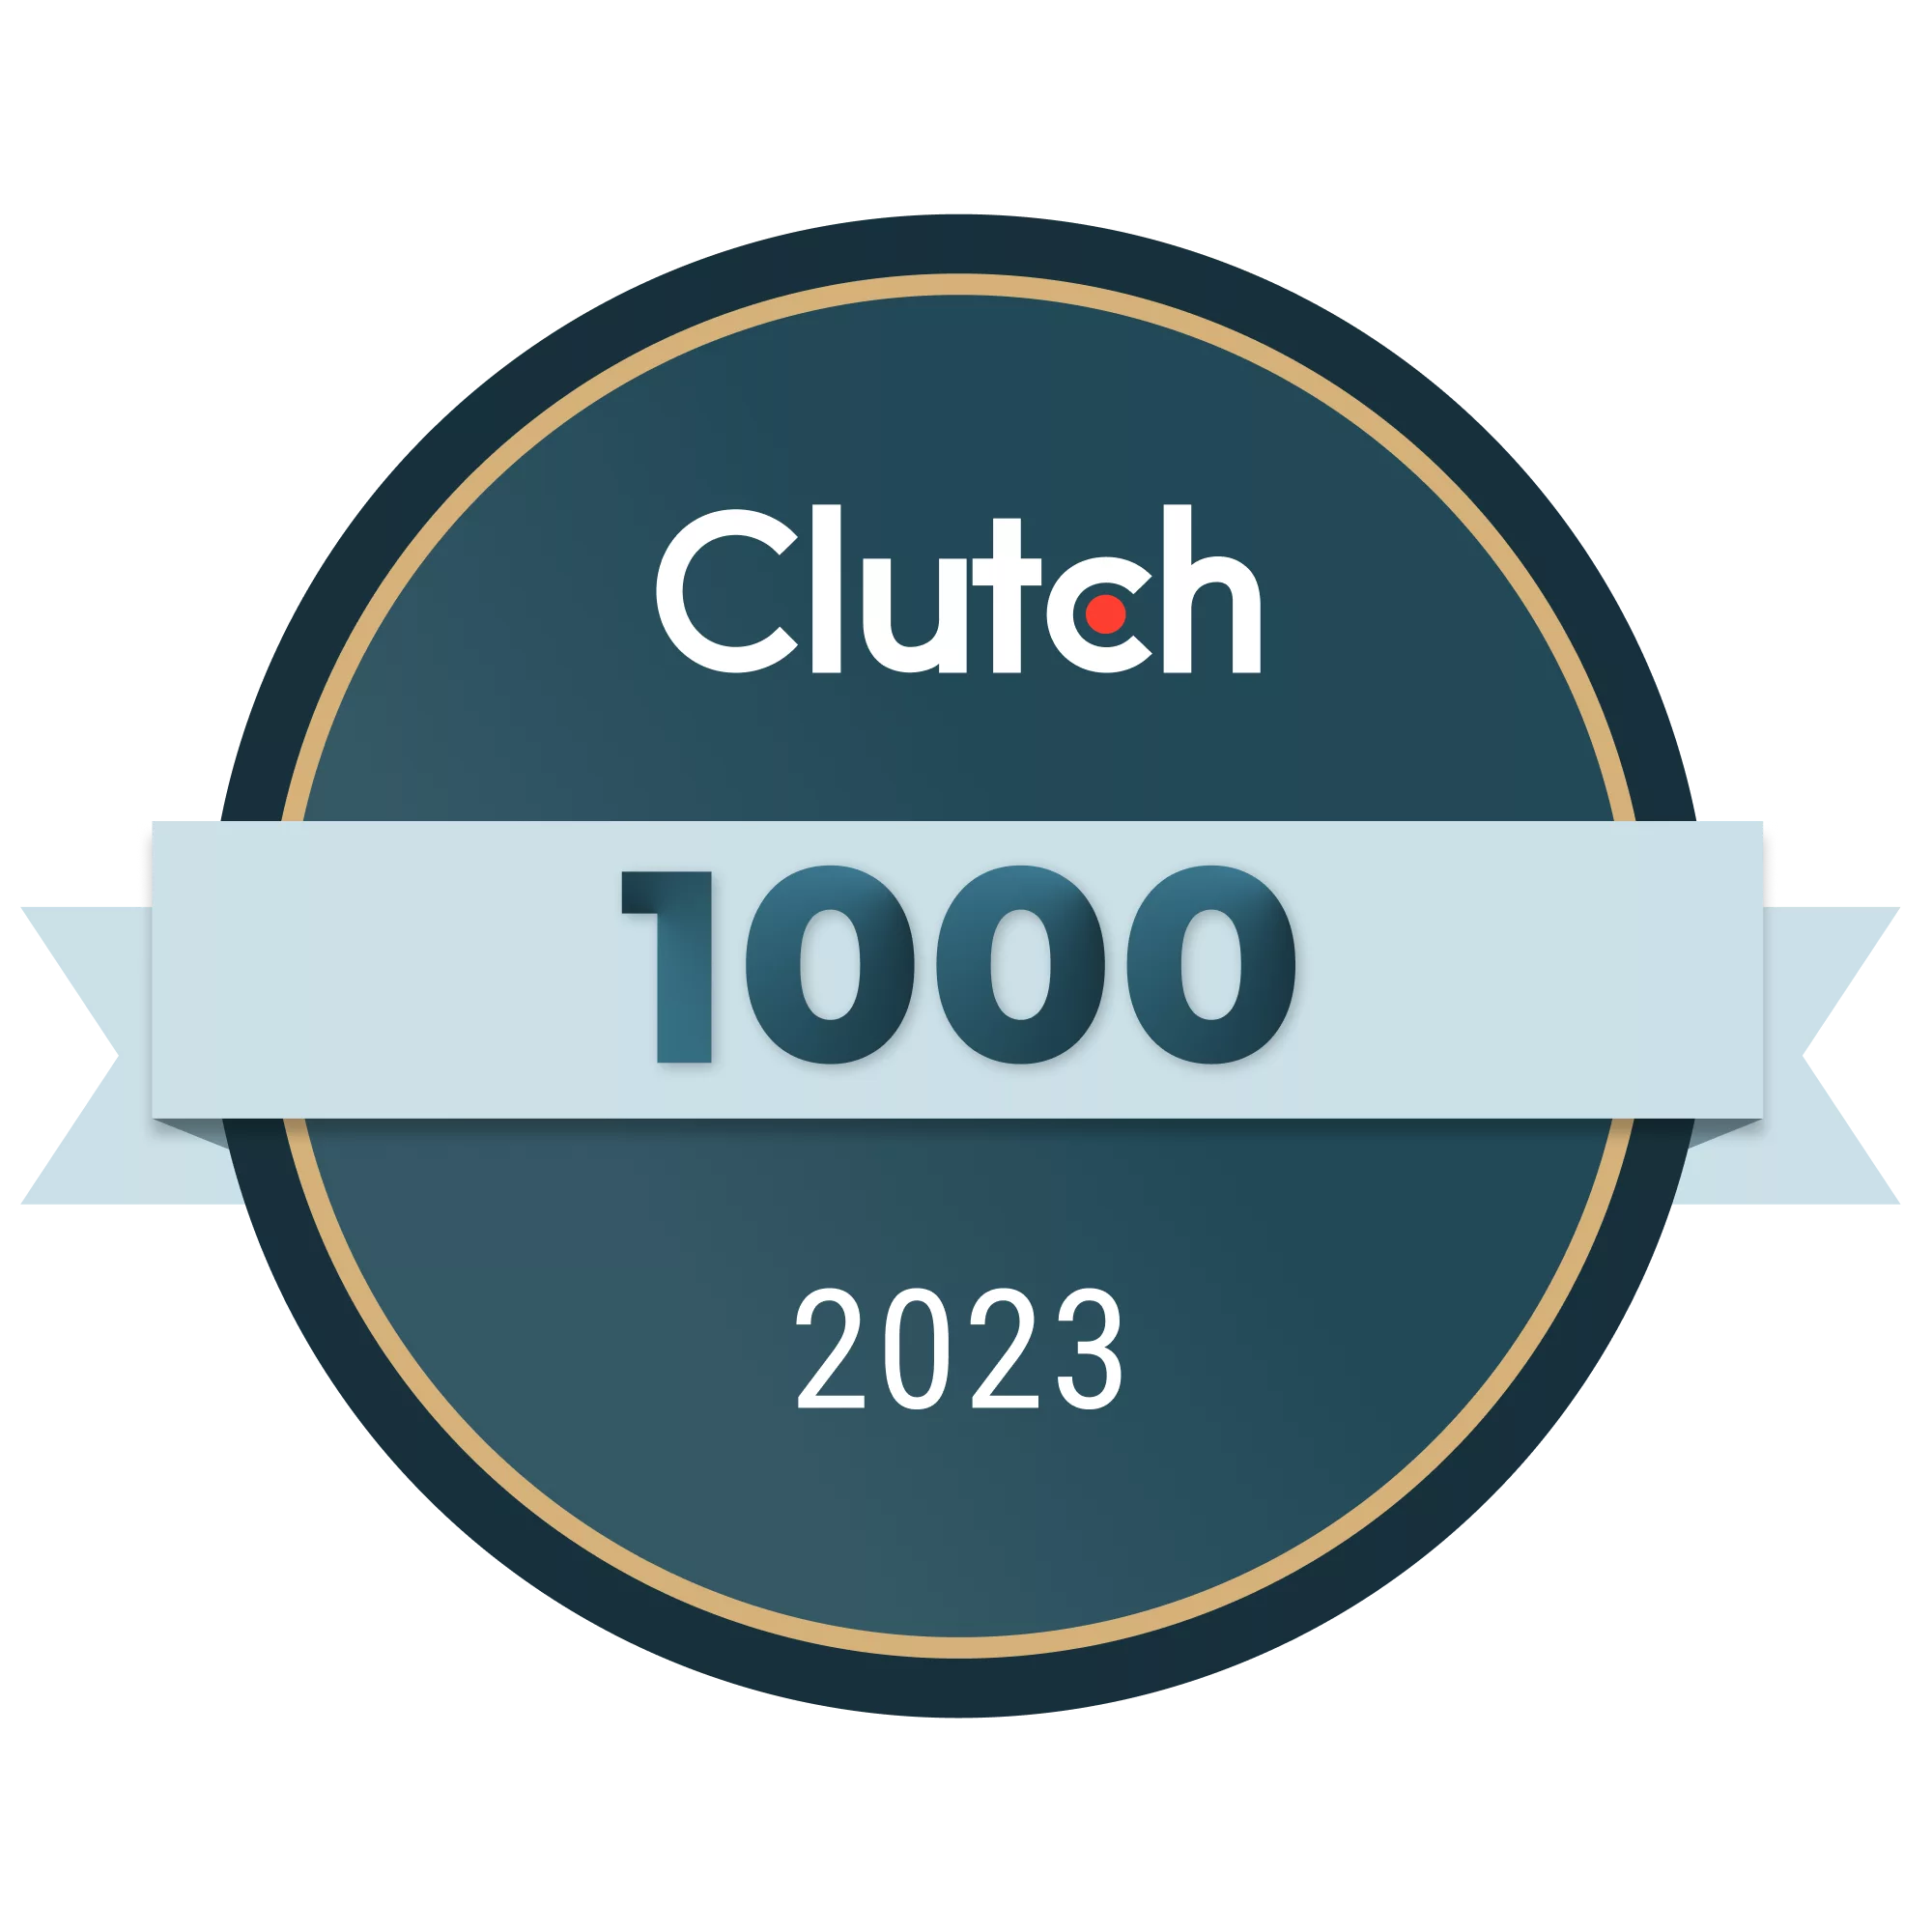 A blue circle for with the Clutch.co logo at the top and the number 1000 as a badge honoring recipients who were listed in the top 1000 companies on Clutch for 2023